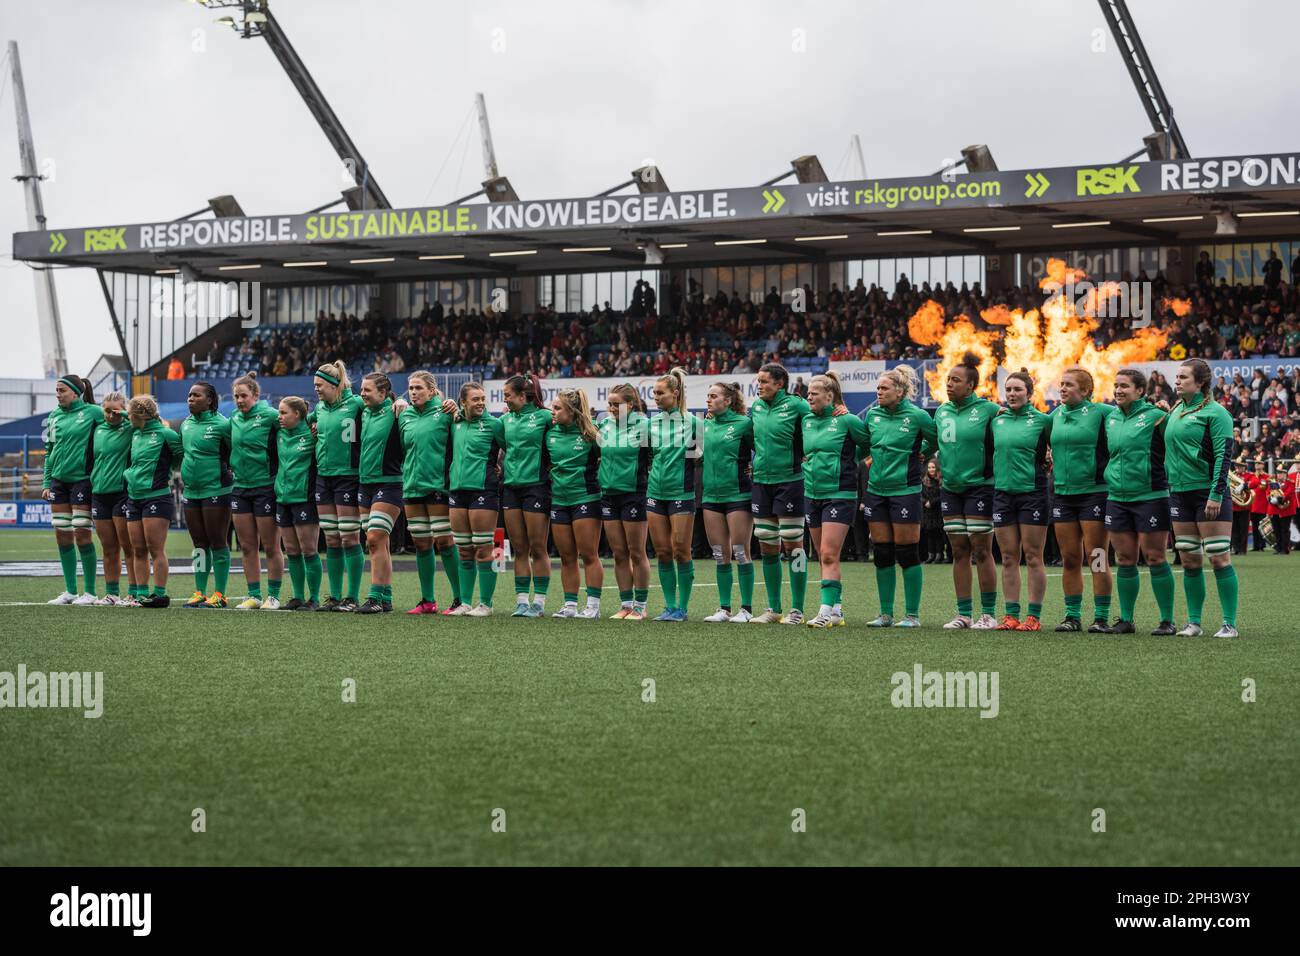 Cardiff, Wales. 25th March 2023. Ireland Squad singing national anthem before the TikTok Women’s Six Nations rugby match, Wales versus Ireland at Cardiff Park Arms Stadium in Cardiff, Wales. Credit: Sam Hardwick/Alamy Live News. Stock Photo